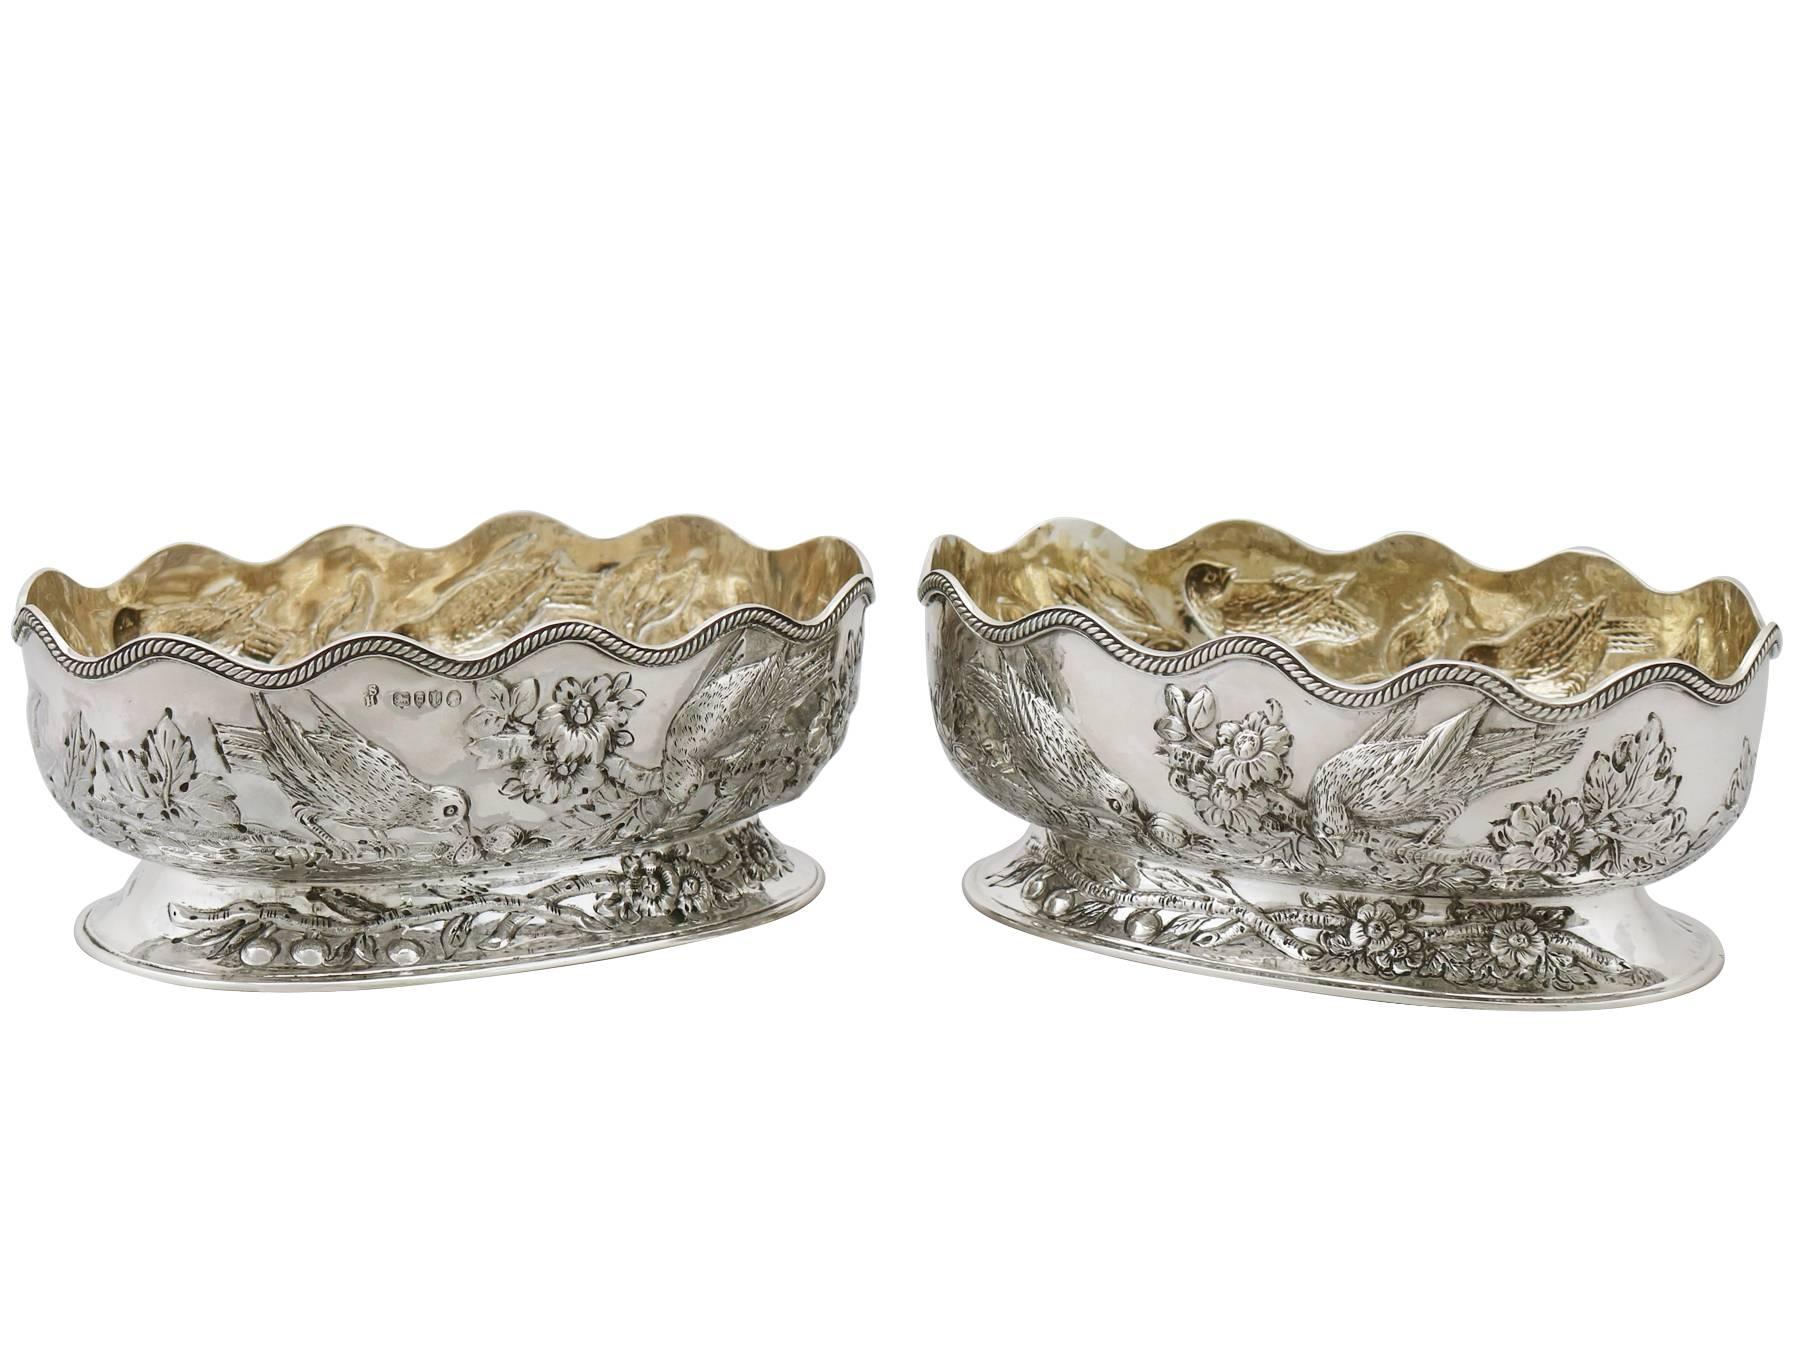 An exceptional, fine and impressive pair of antique Victorian English sterling silver bon bon dishes made by Charles Stuart Harris; part of our ornamental silverware collection

These exceptional antique Victorian English bon bon dishes in